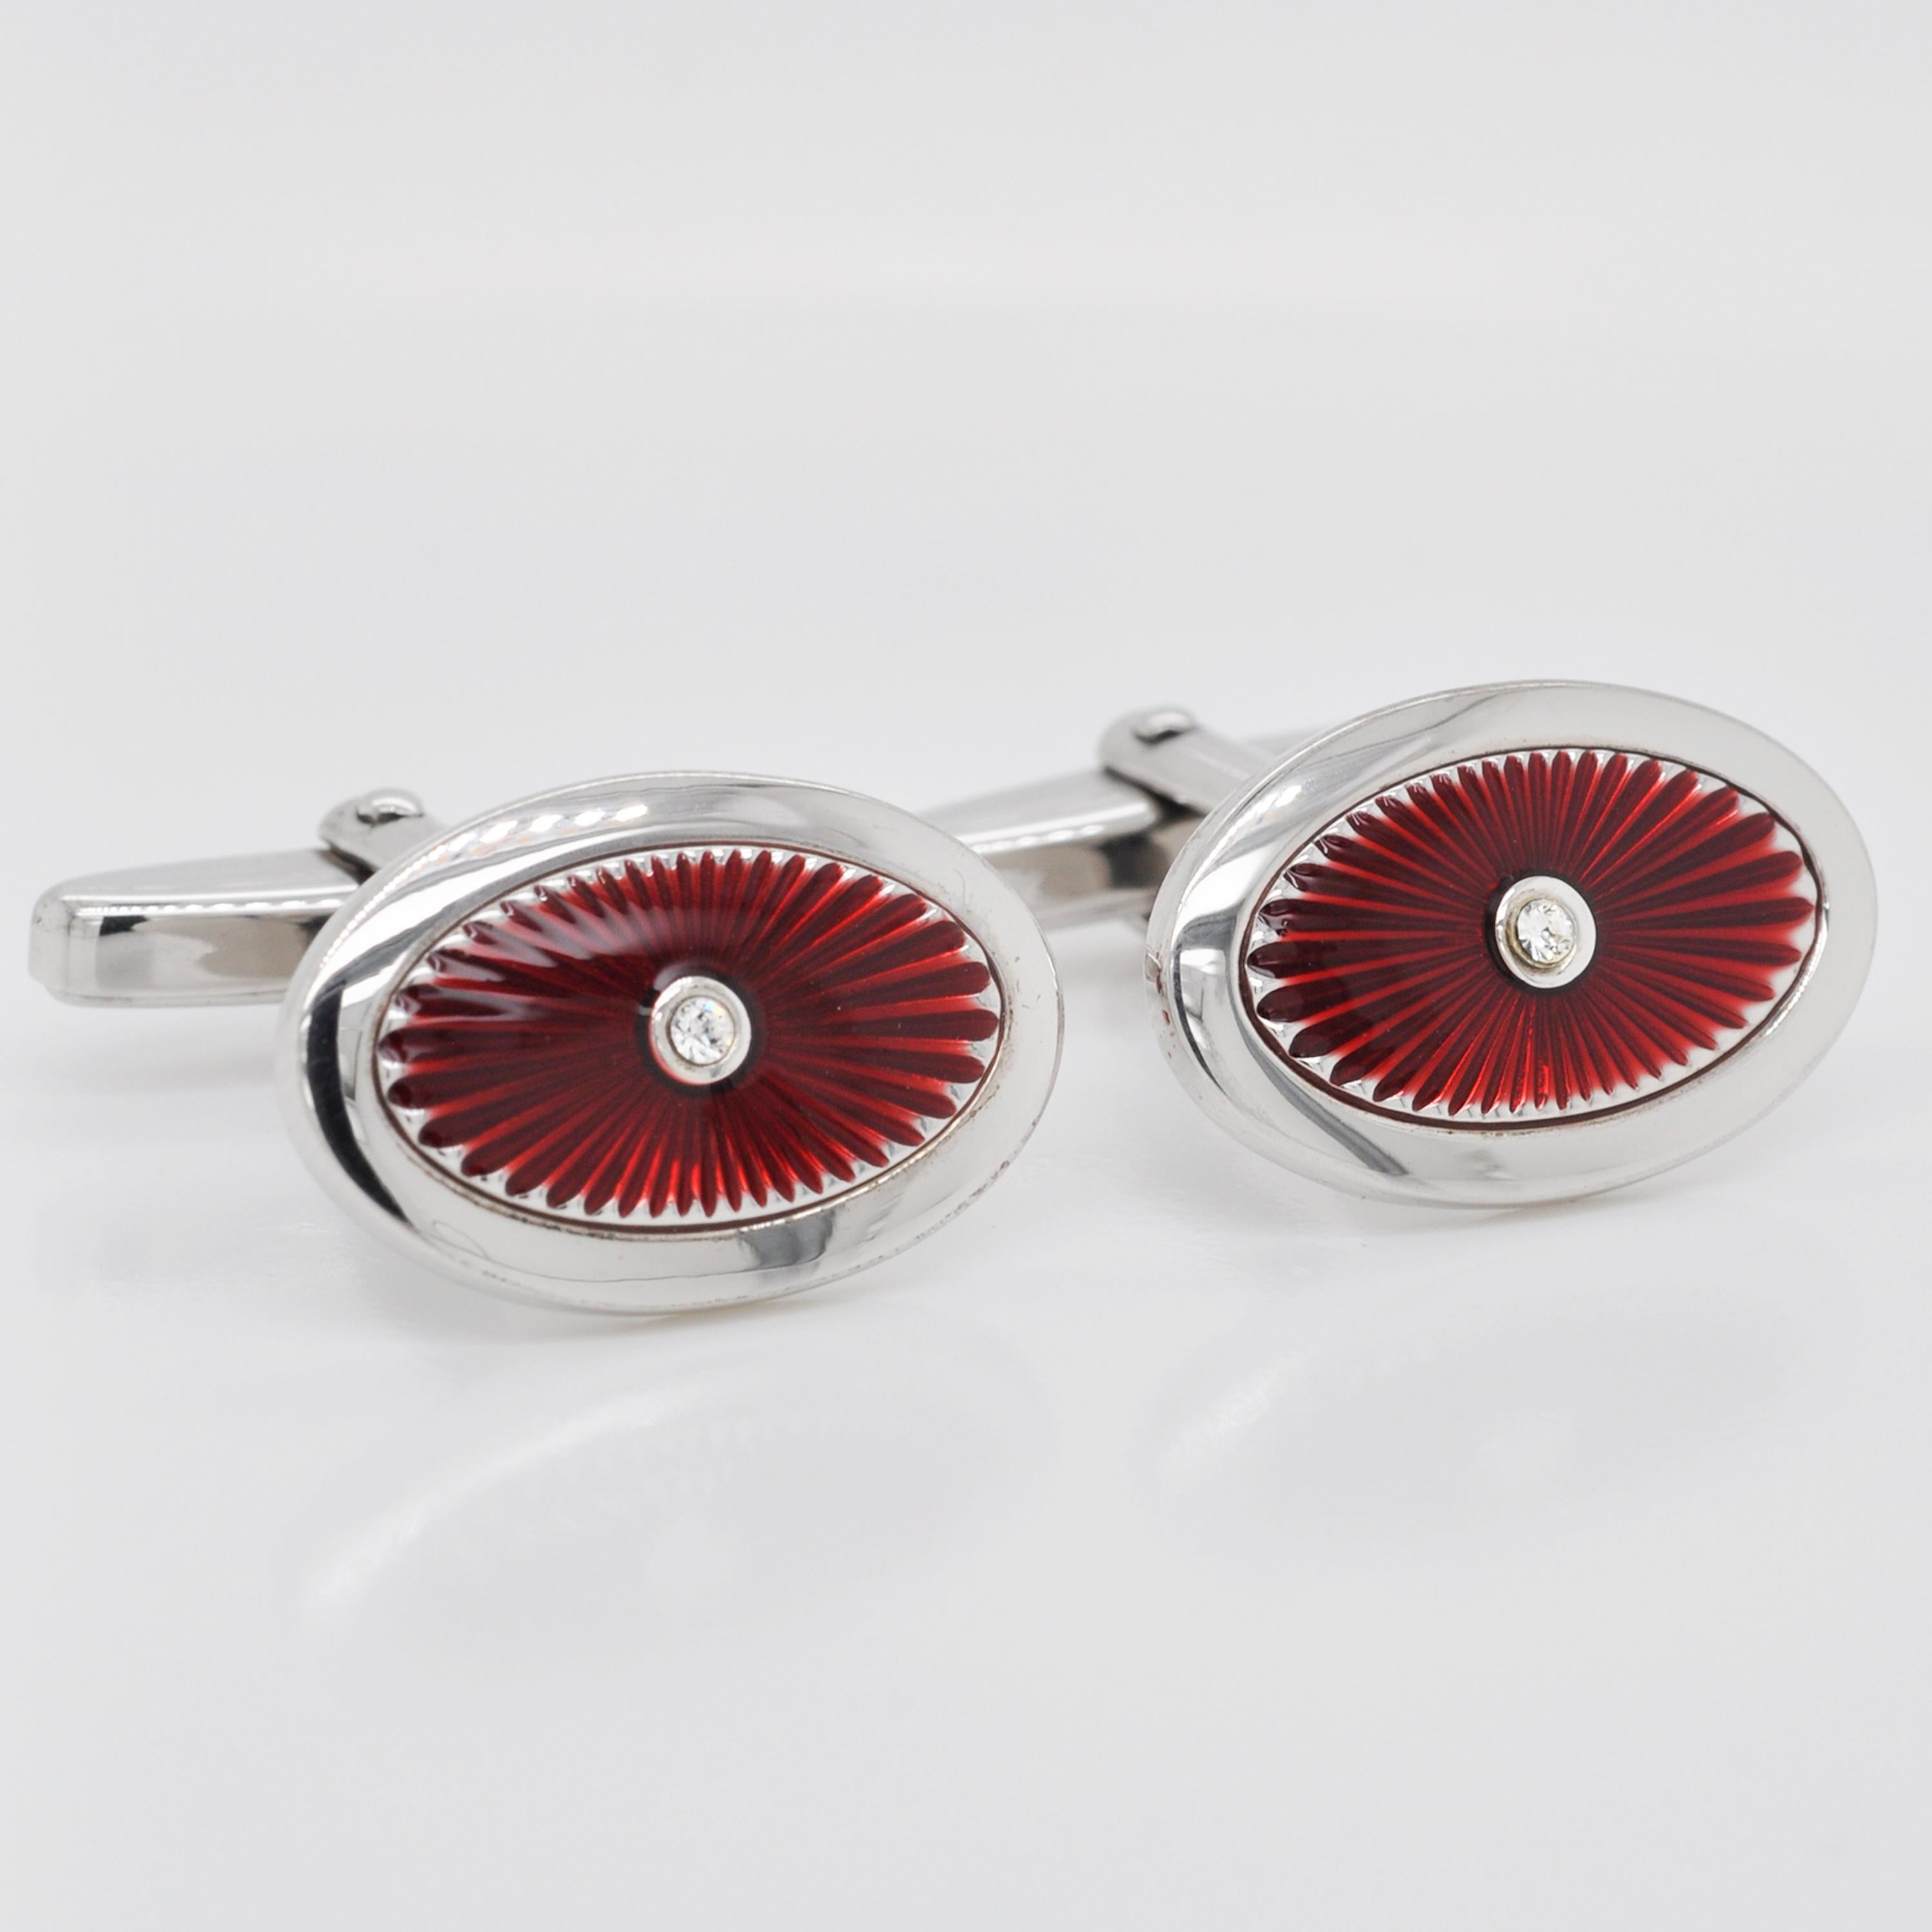 Made from sterling silver, these cufflinks are the perfect mix of contemporary style with a dash of deep red colour. These oval shaped cufflinks feature stunning deep red guilloché enamel with radiant patterns under the enamel, enveloped within